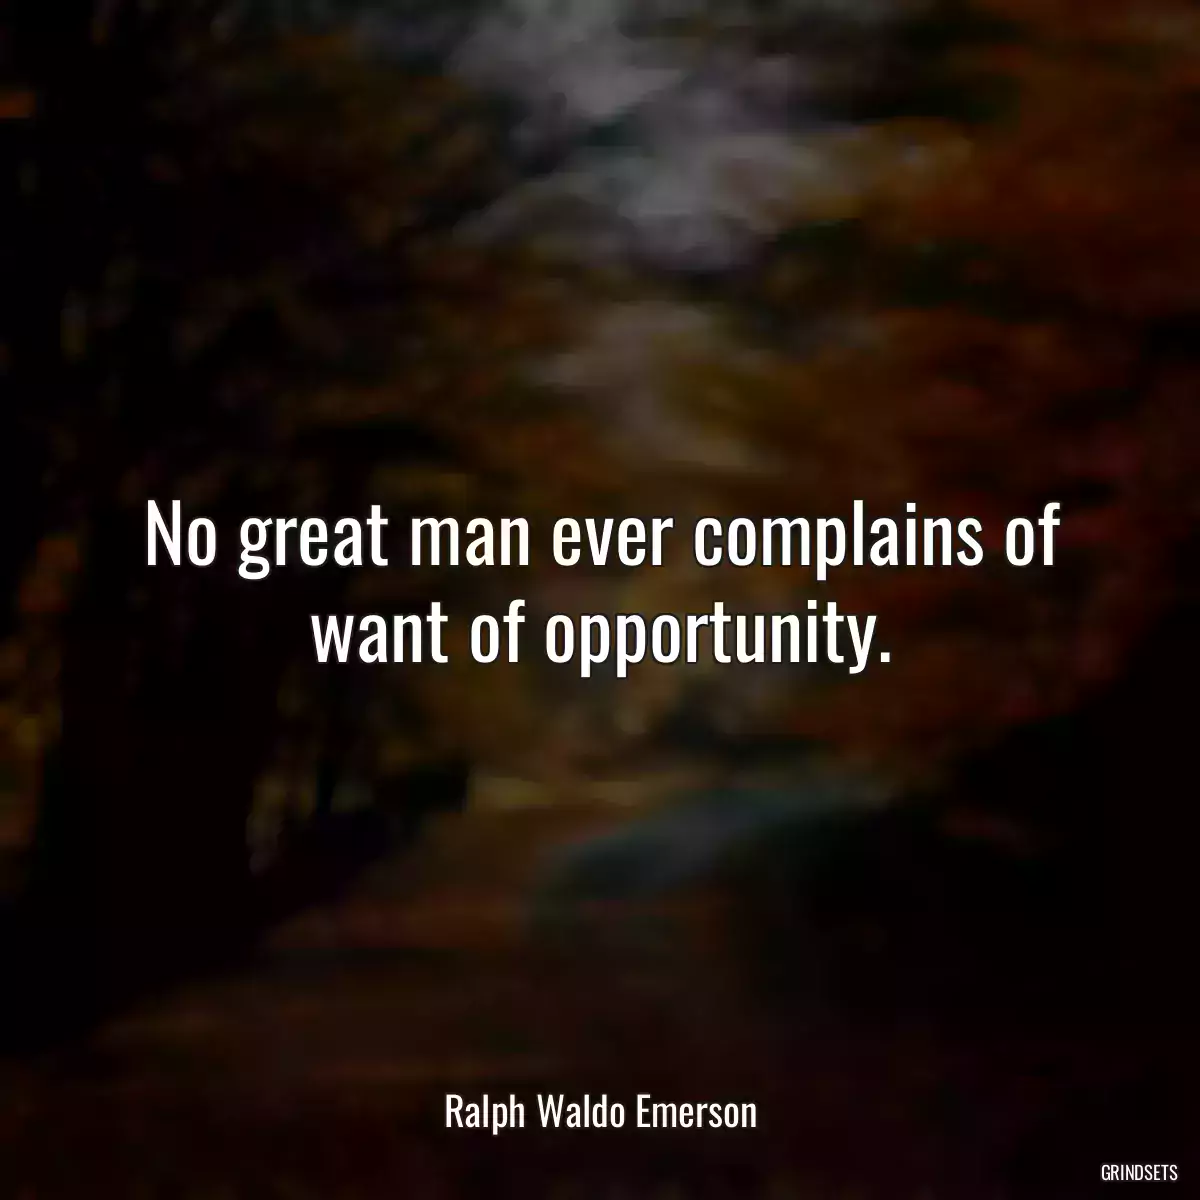 No great man ever complains of want of opportunity.